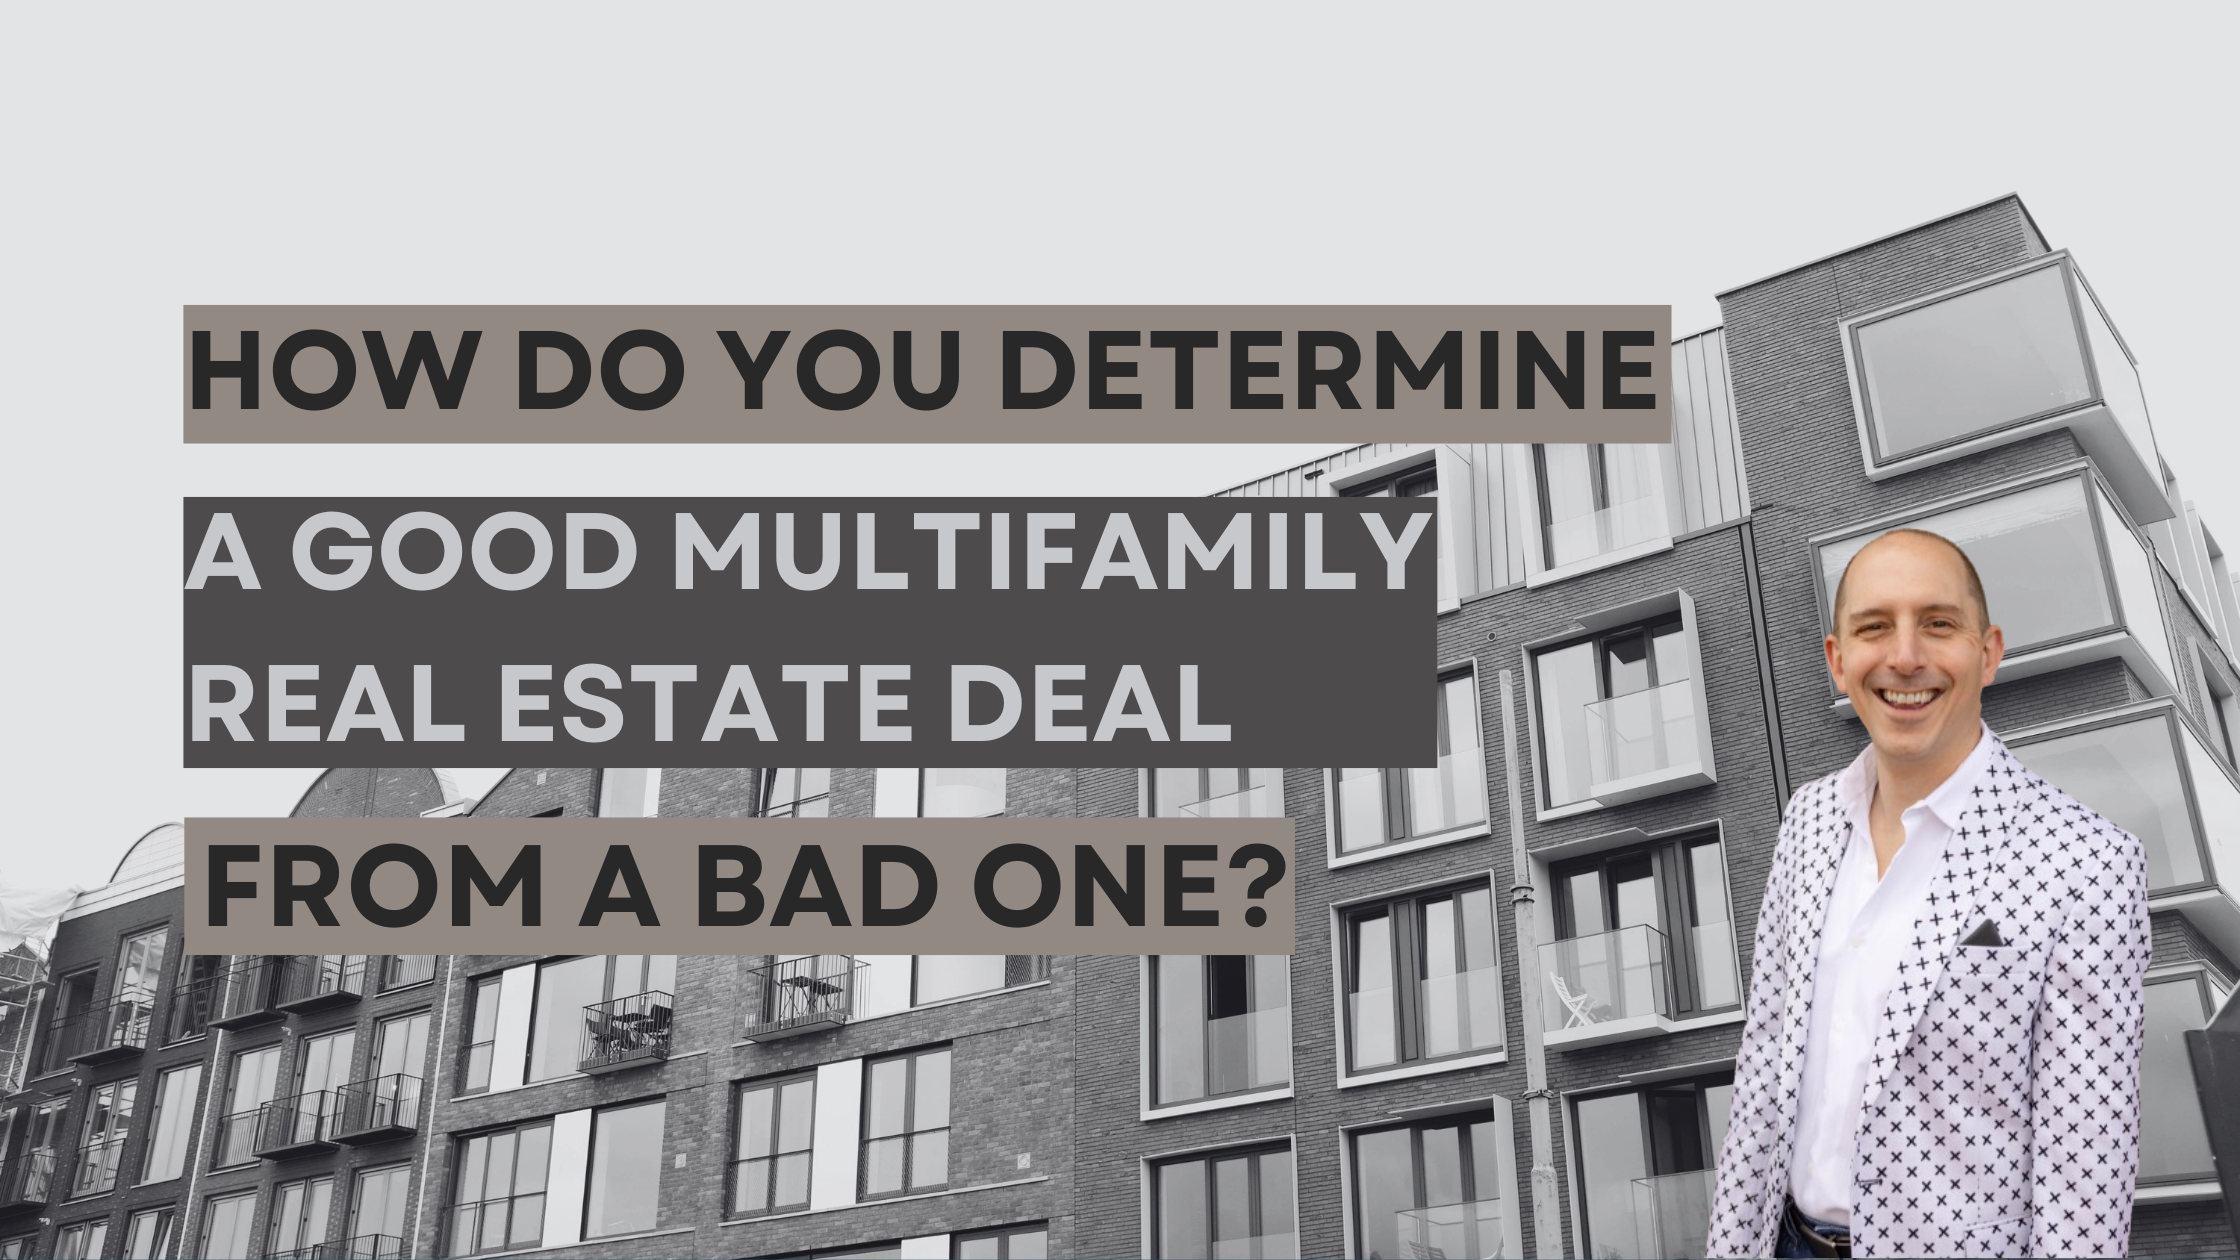 How do you determine a good multi-family real estate deal from a bad one?